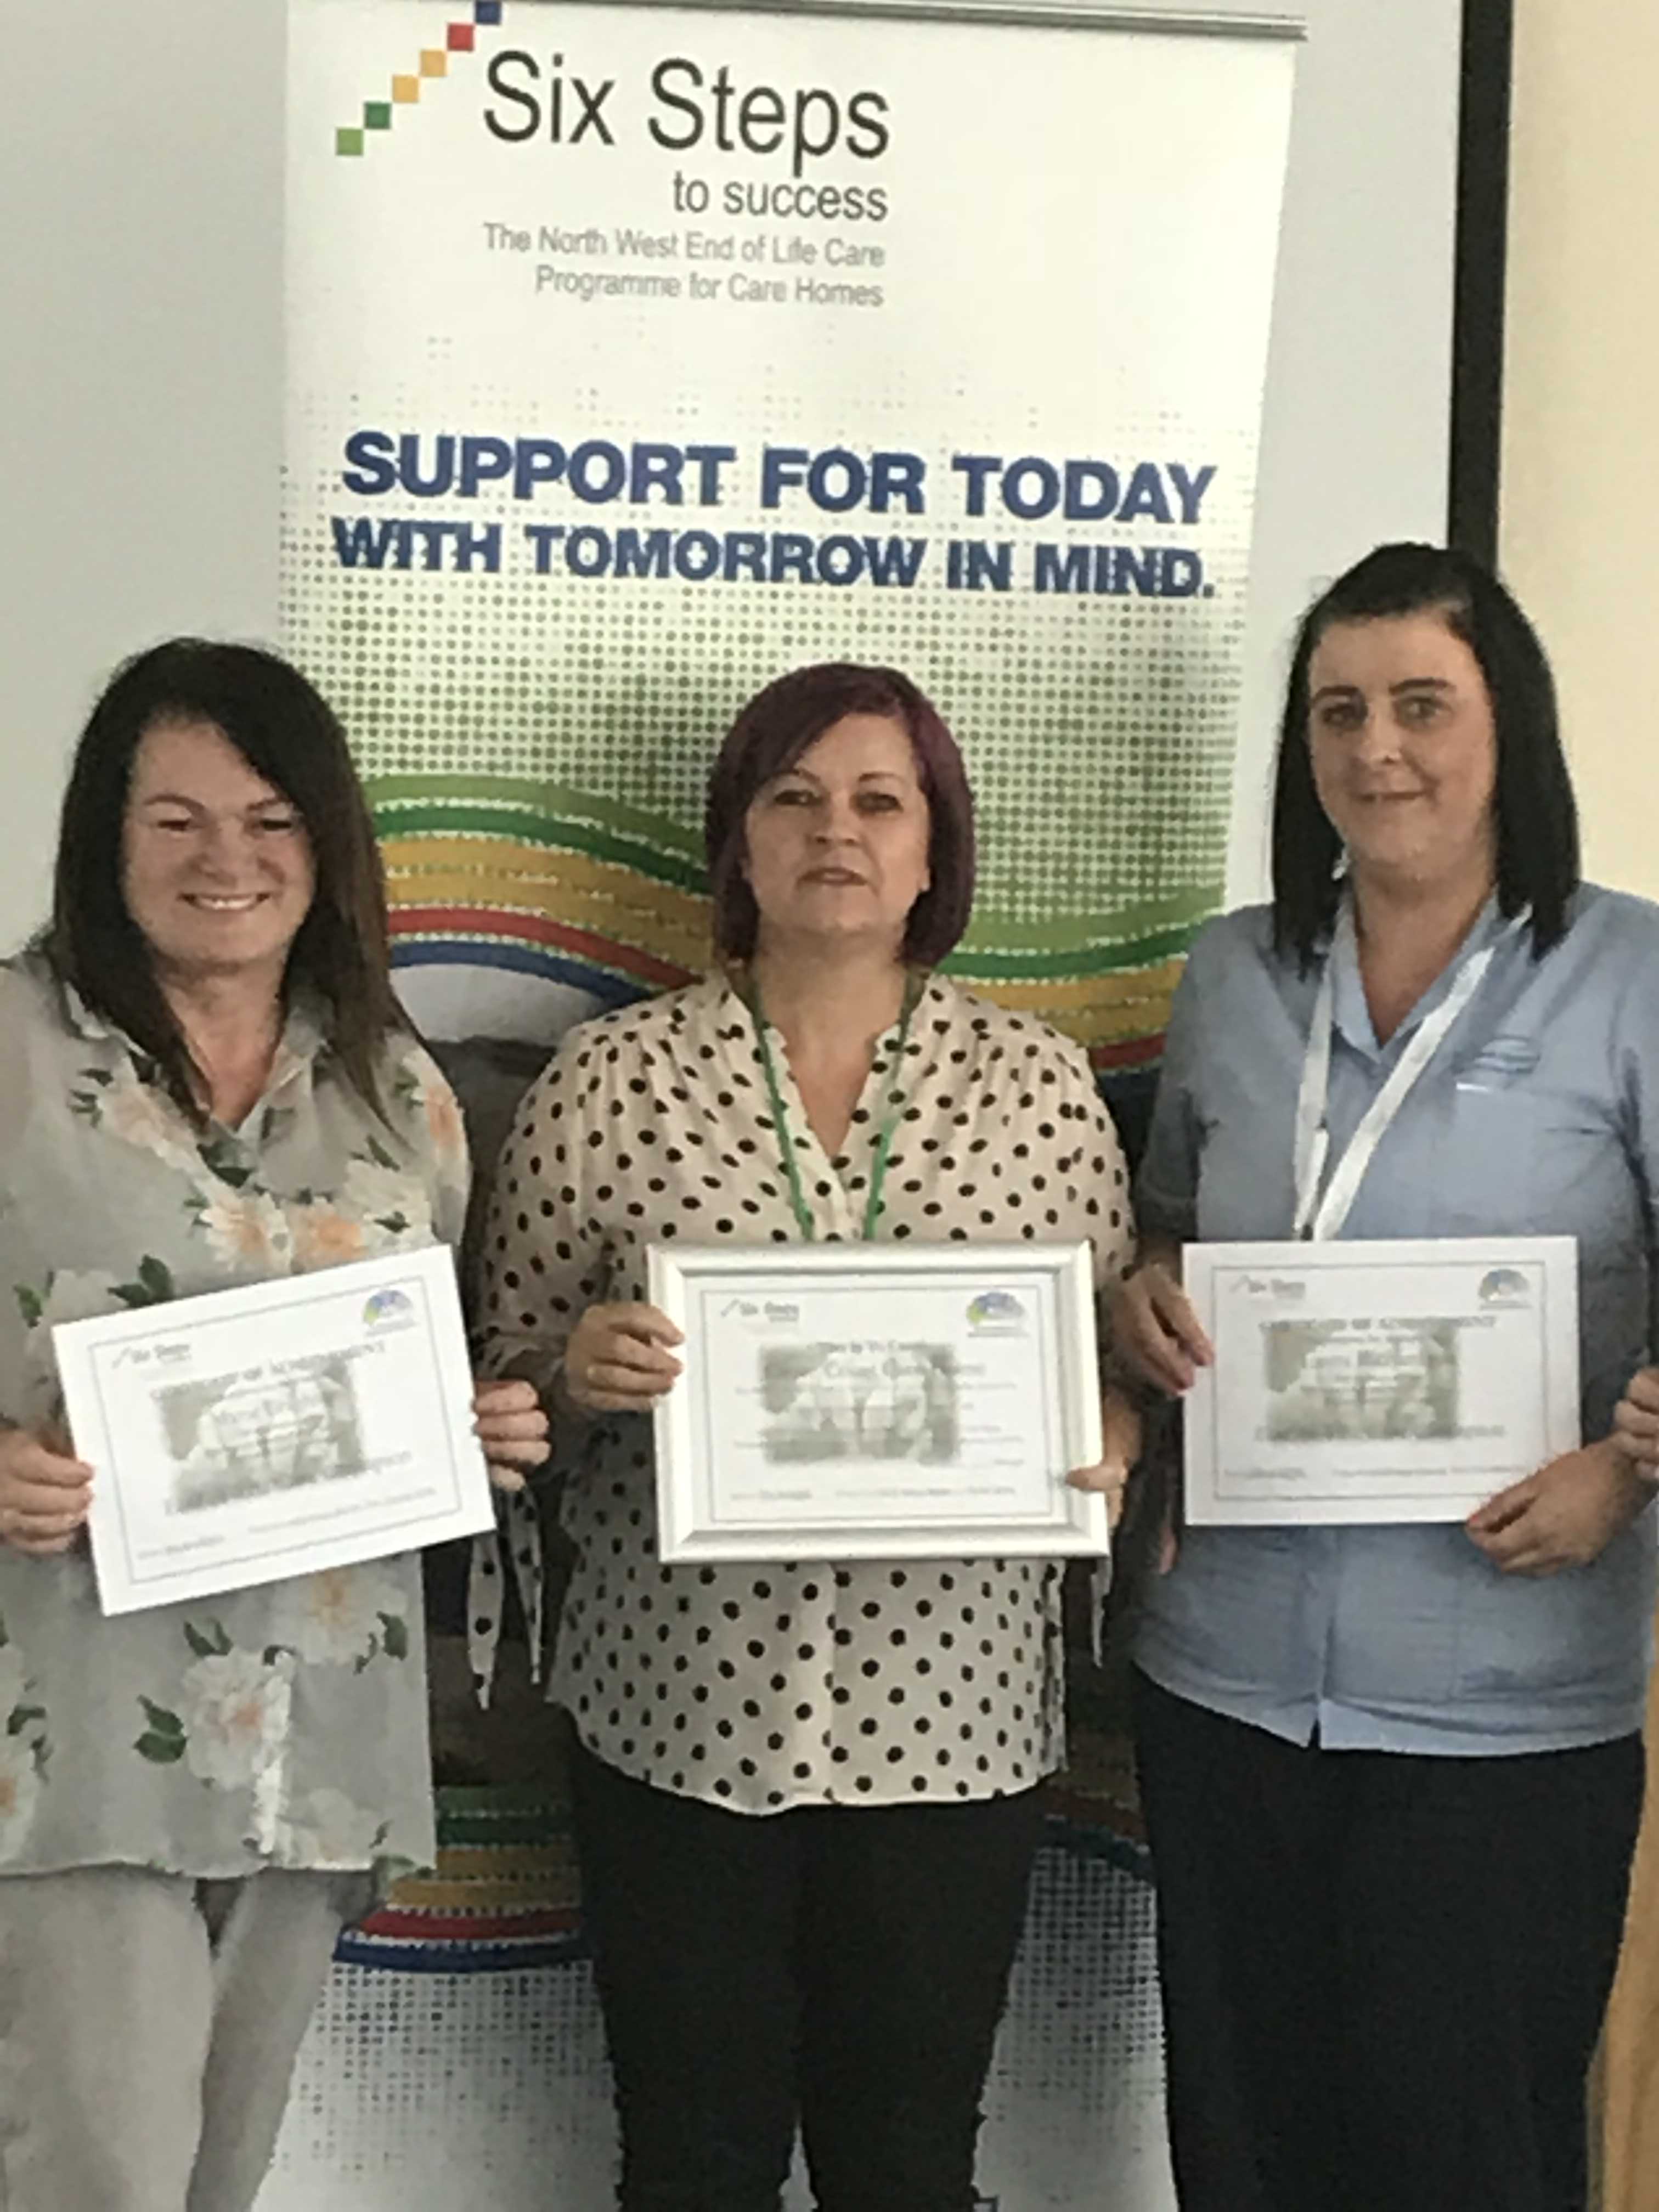 Six Steps 2018 success for Grace Court Care Centre Staff: Key Healthcare is dedicated to caring for elderly residents in safe. We have multiple dementia care homes including our care home middlesbrough, our care home St. Helen and care home saltburn. We excel in monitoring and improving care levels.